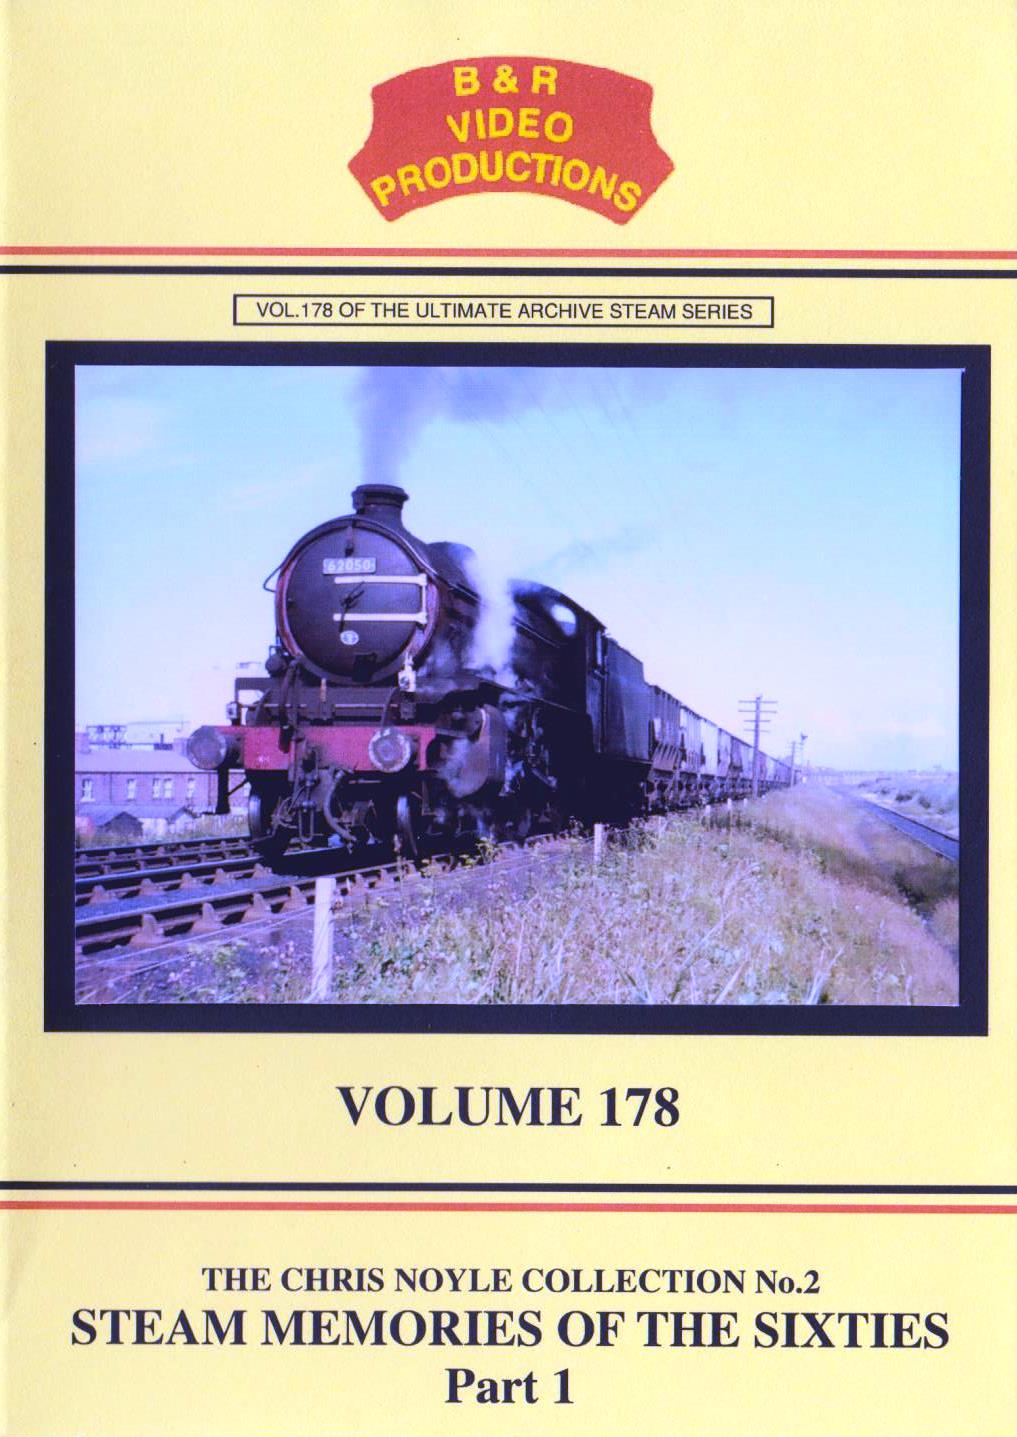 B & R Video Productions Vol 178 - The Chris Noyle collection No.2 Steam memories of the sixties Part 1 